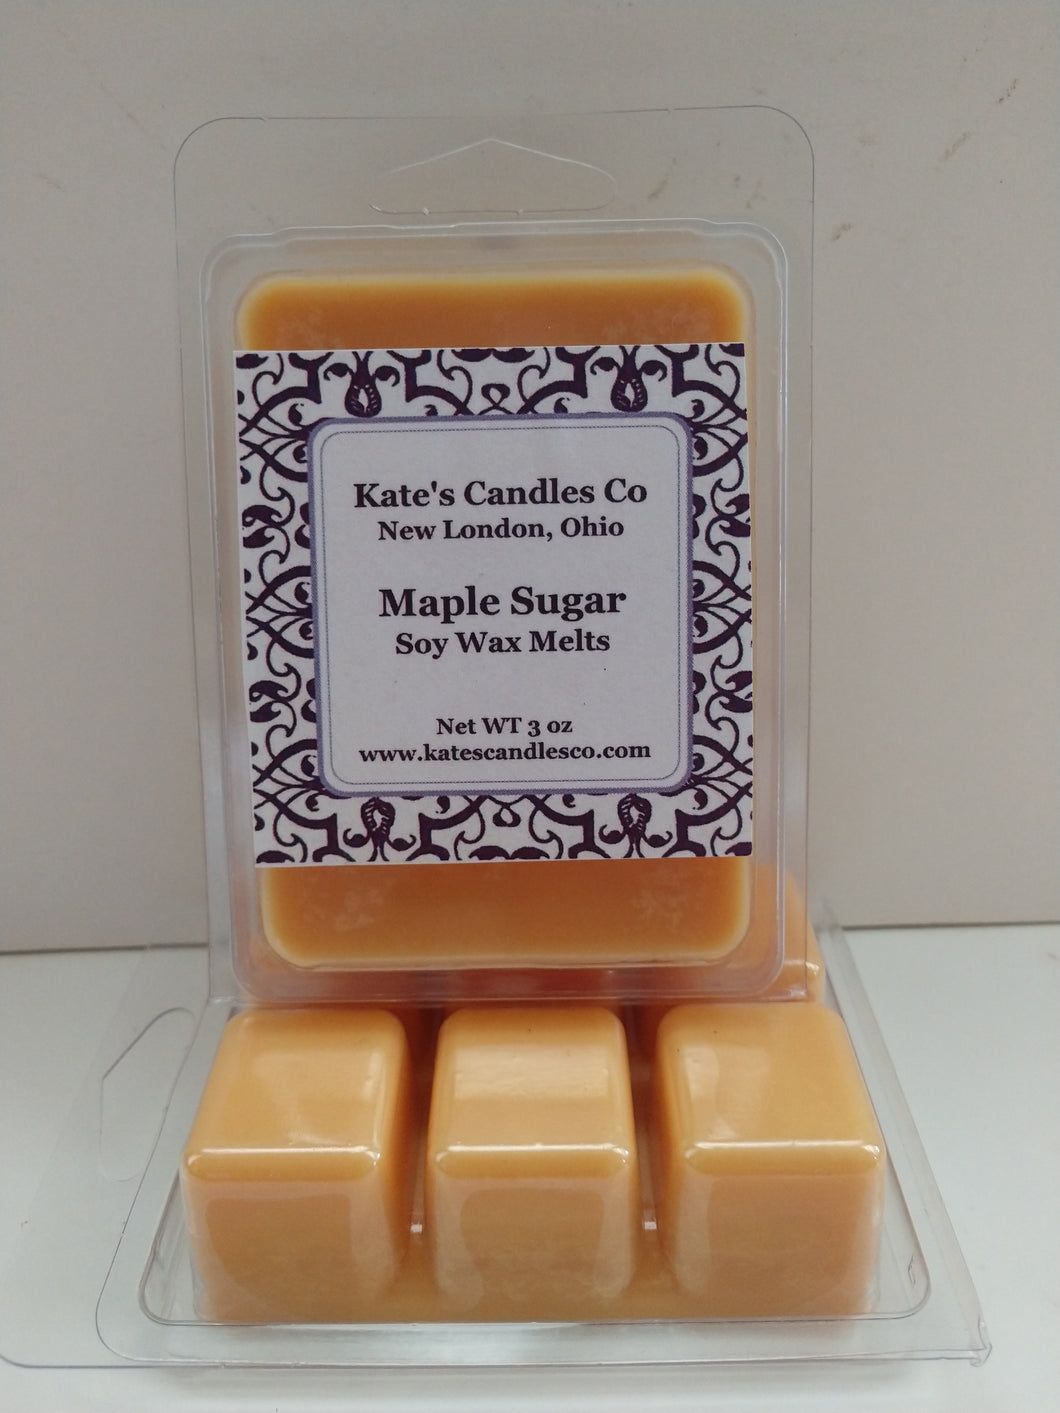 Maple Sugar Soy Wax Melts - Kate's Candles Co. Soy Candles